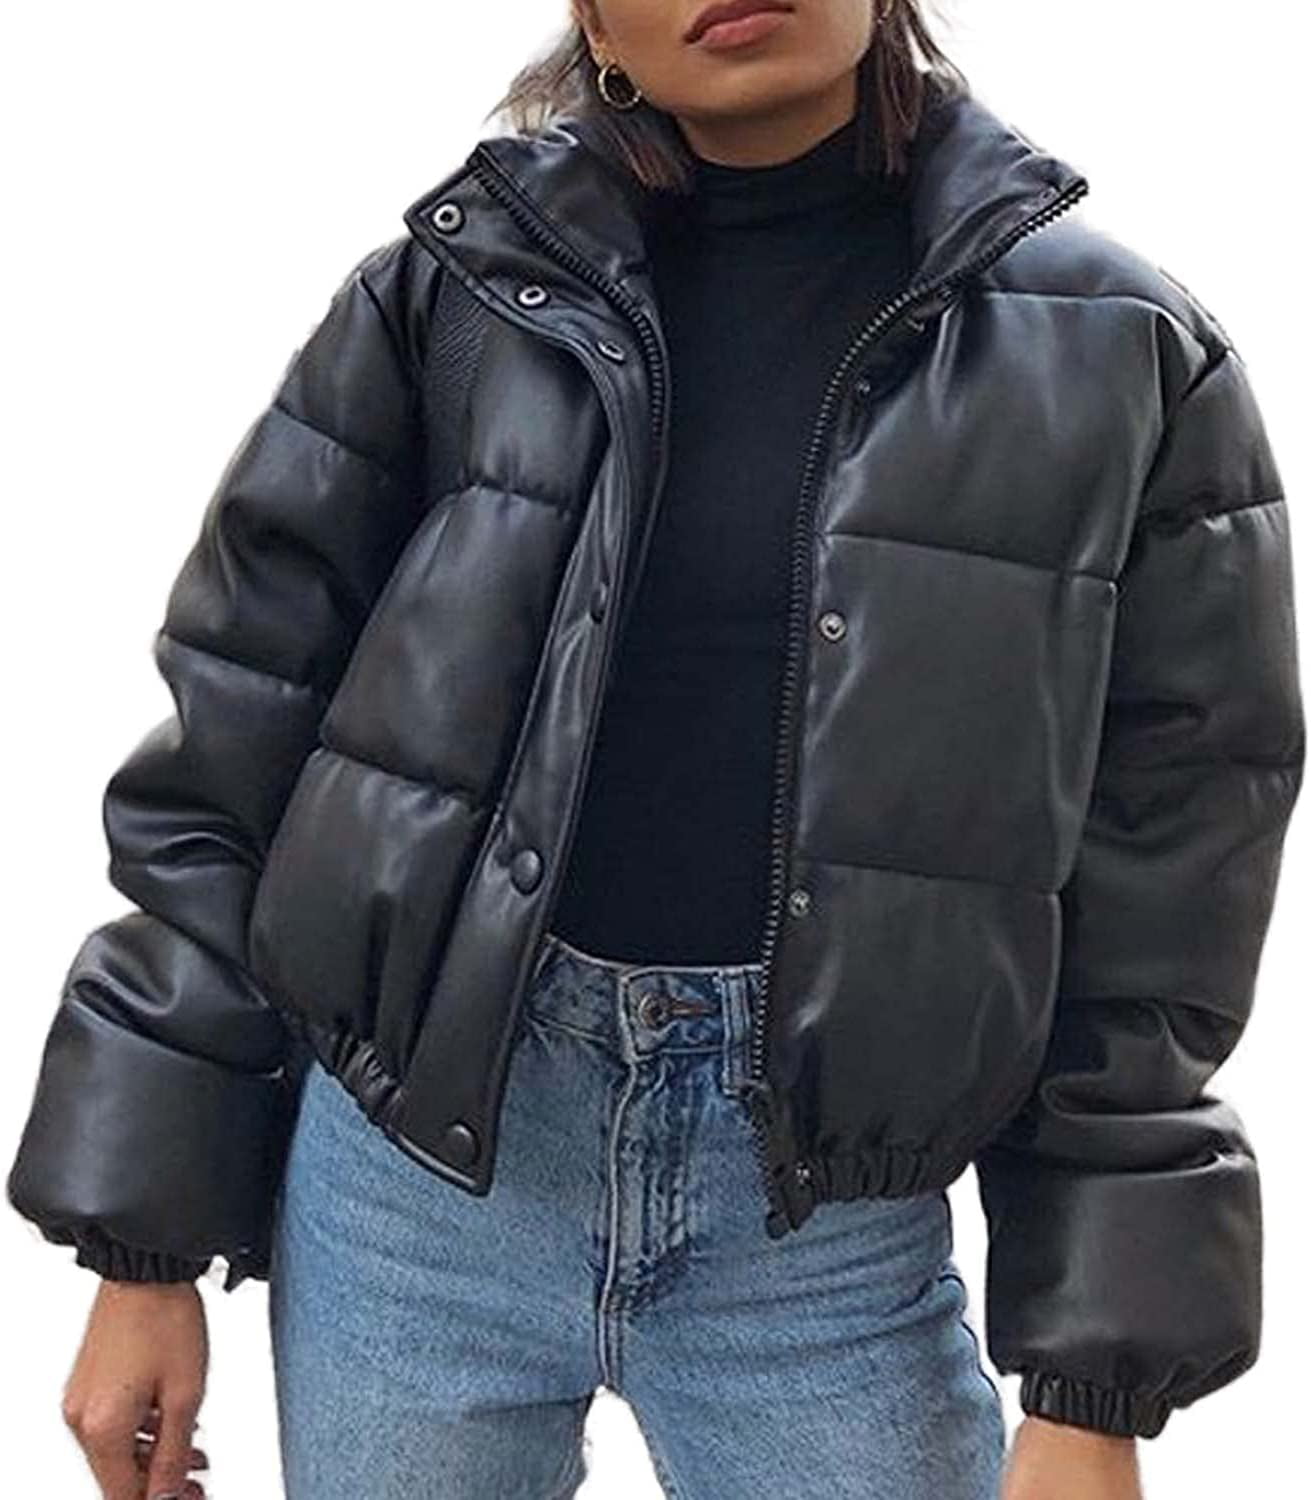  Women's Cropped Puffer Jacket Baggy Short Faux Leather